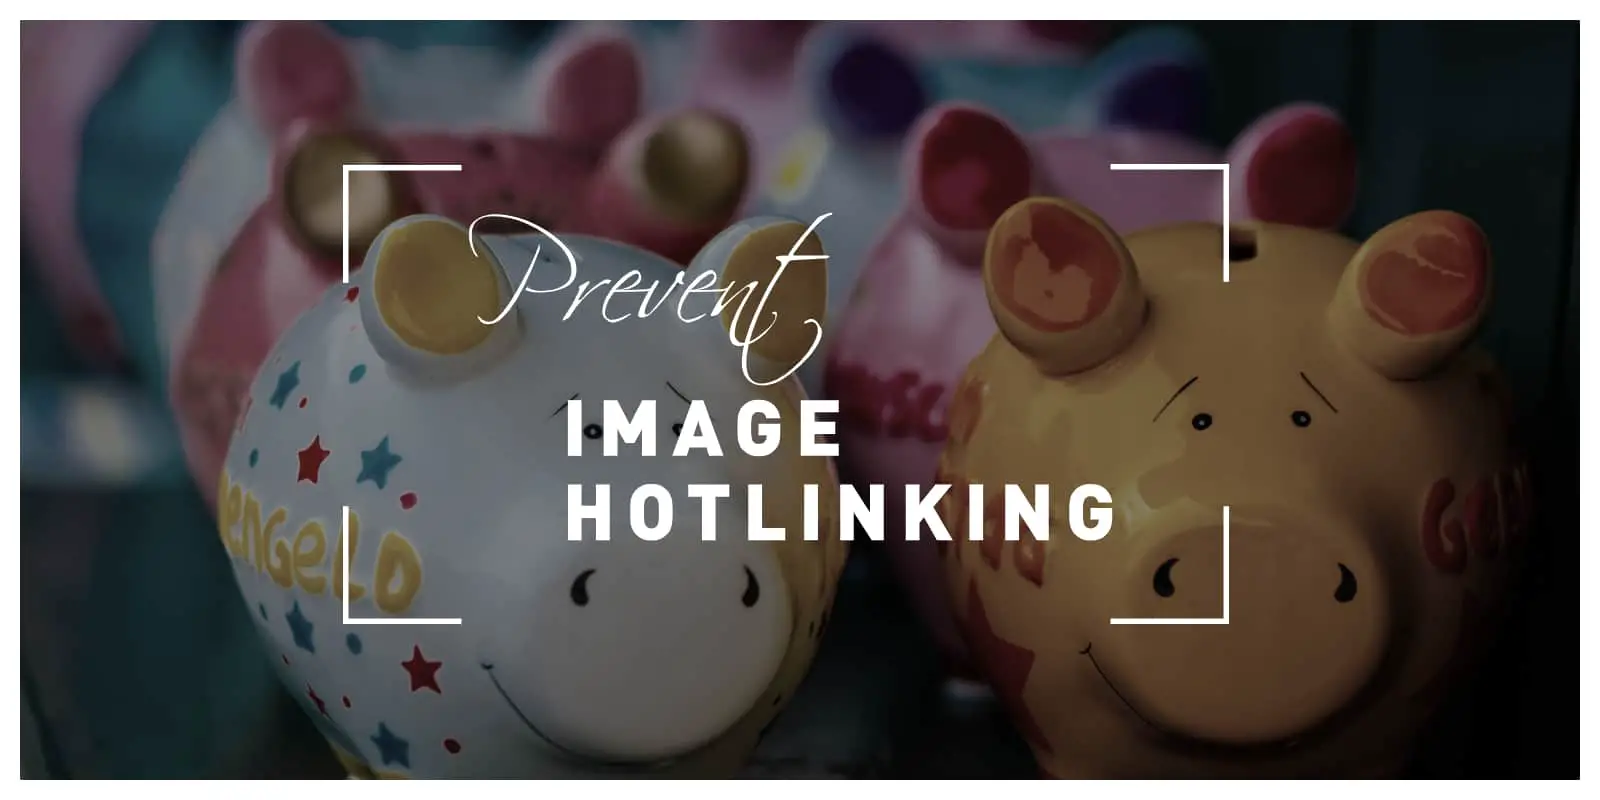 How to Prevent Image Hotlinking